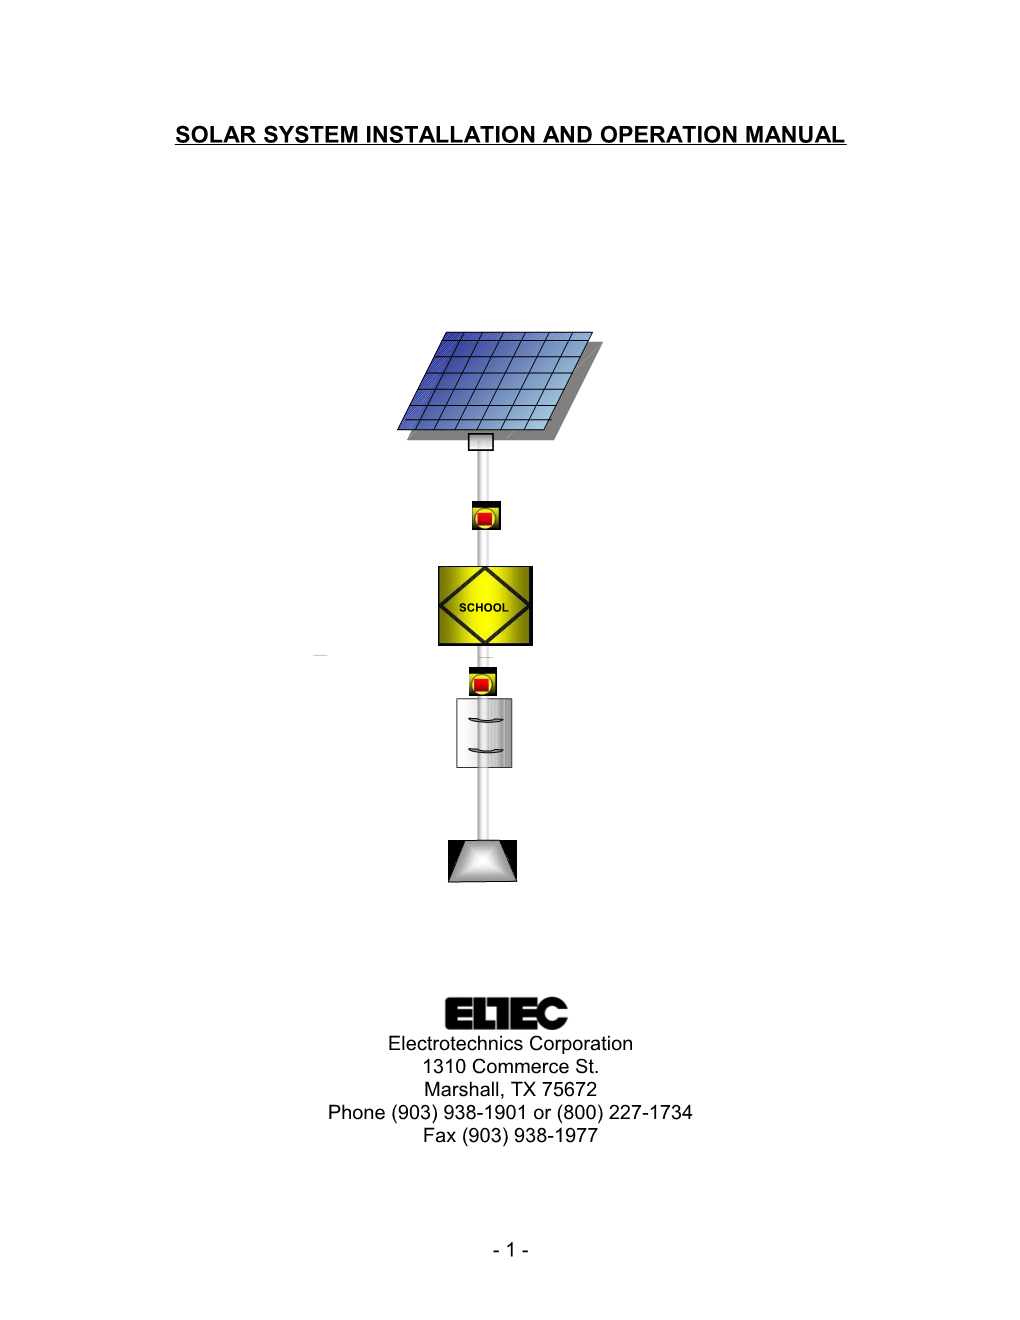 Solar System Installation and Operation Manual